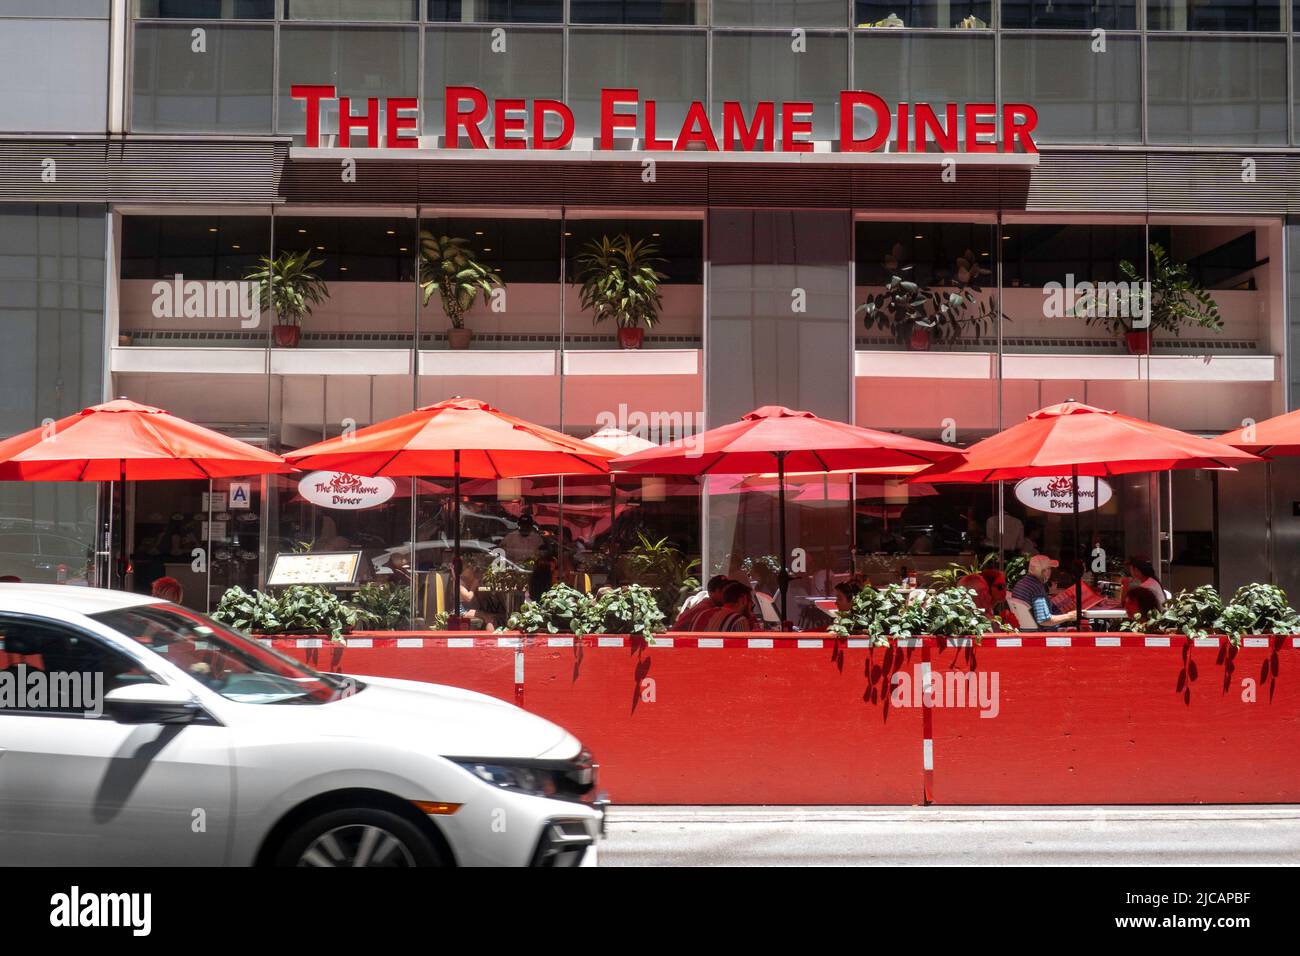 The Red Flame Diner on West 44th Street has an outdoor street side dining area, New York City, USA  2022 Stock Photo